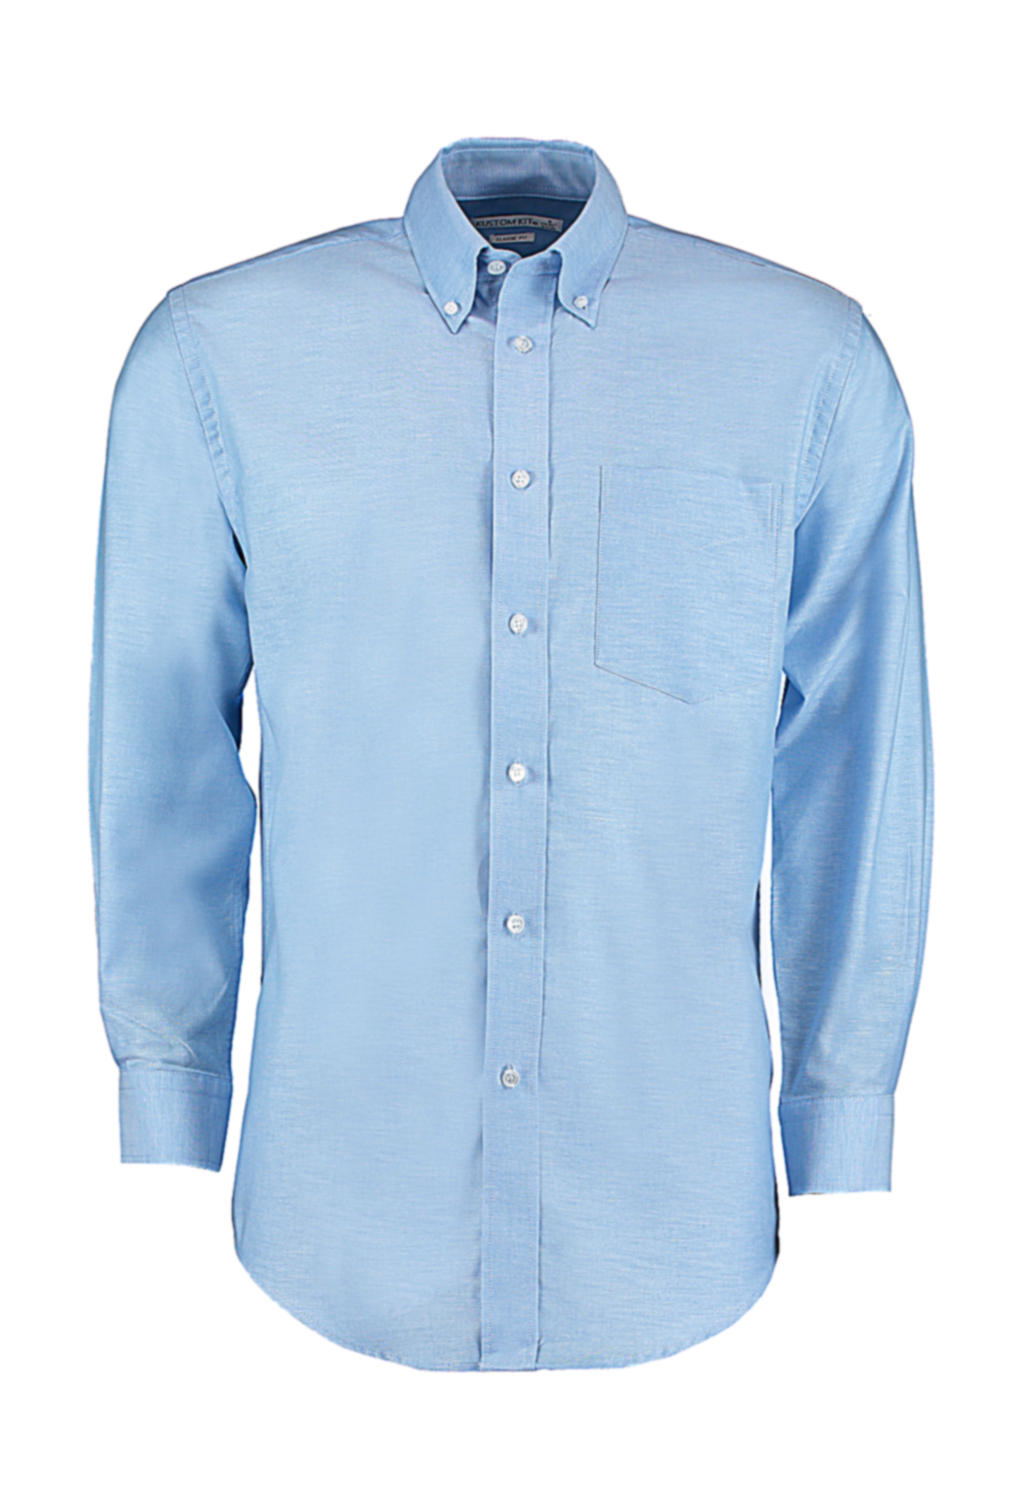  Classic Fit Workwear Oxford Shirt in Farbe Light Blue